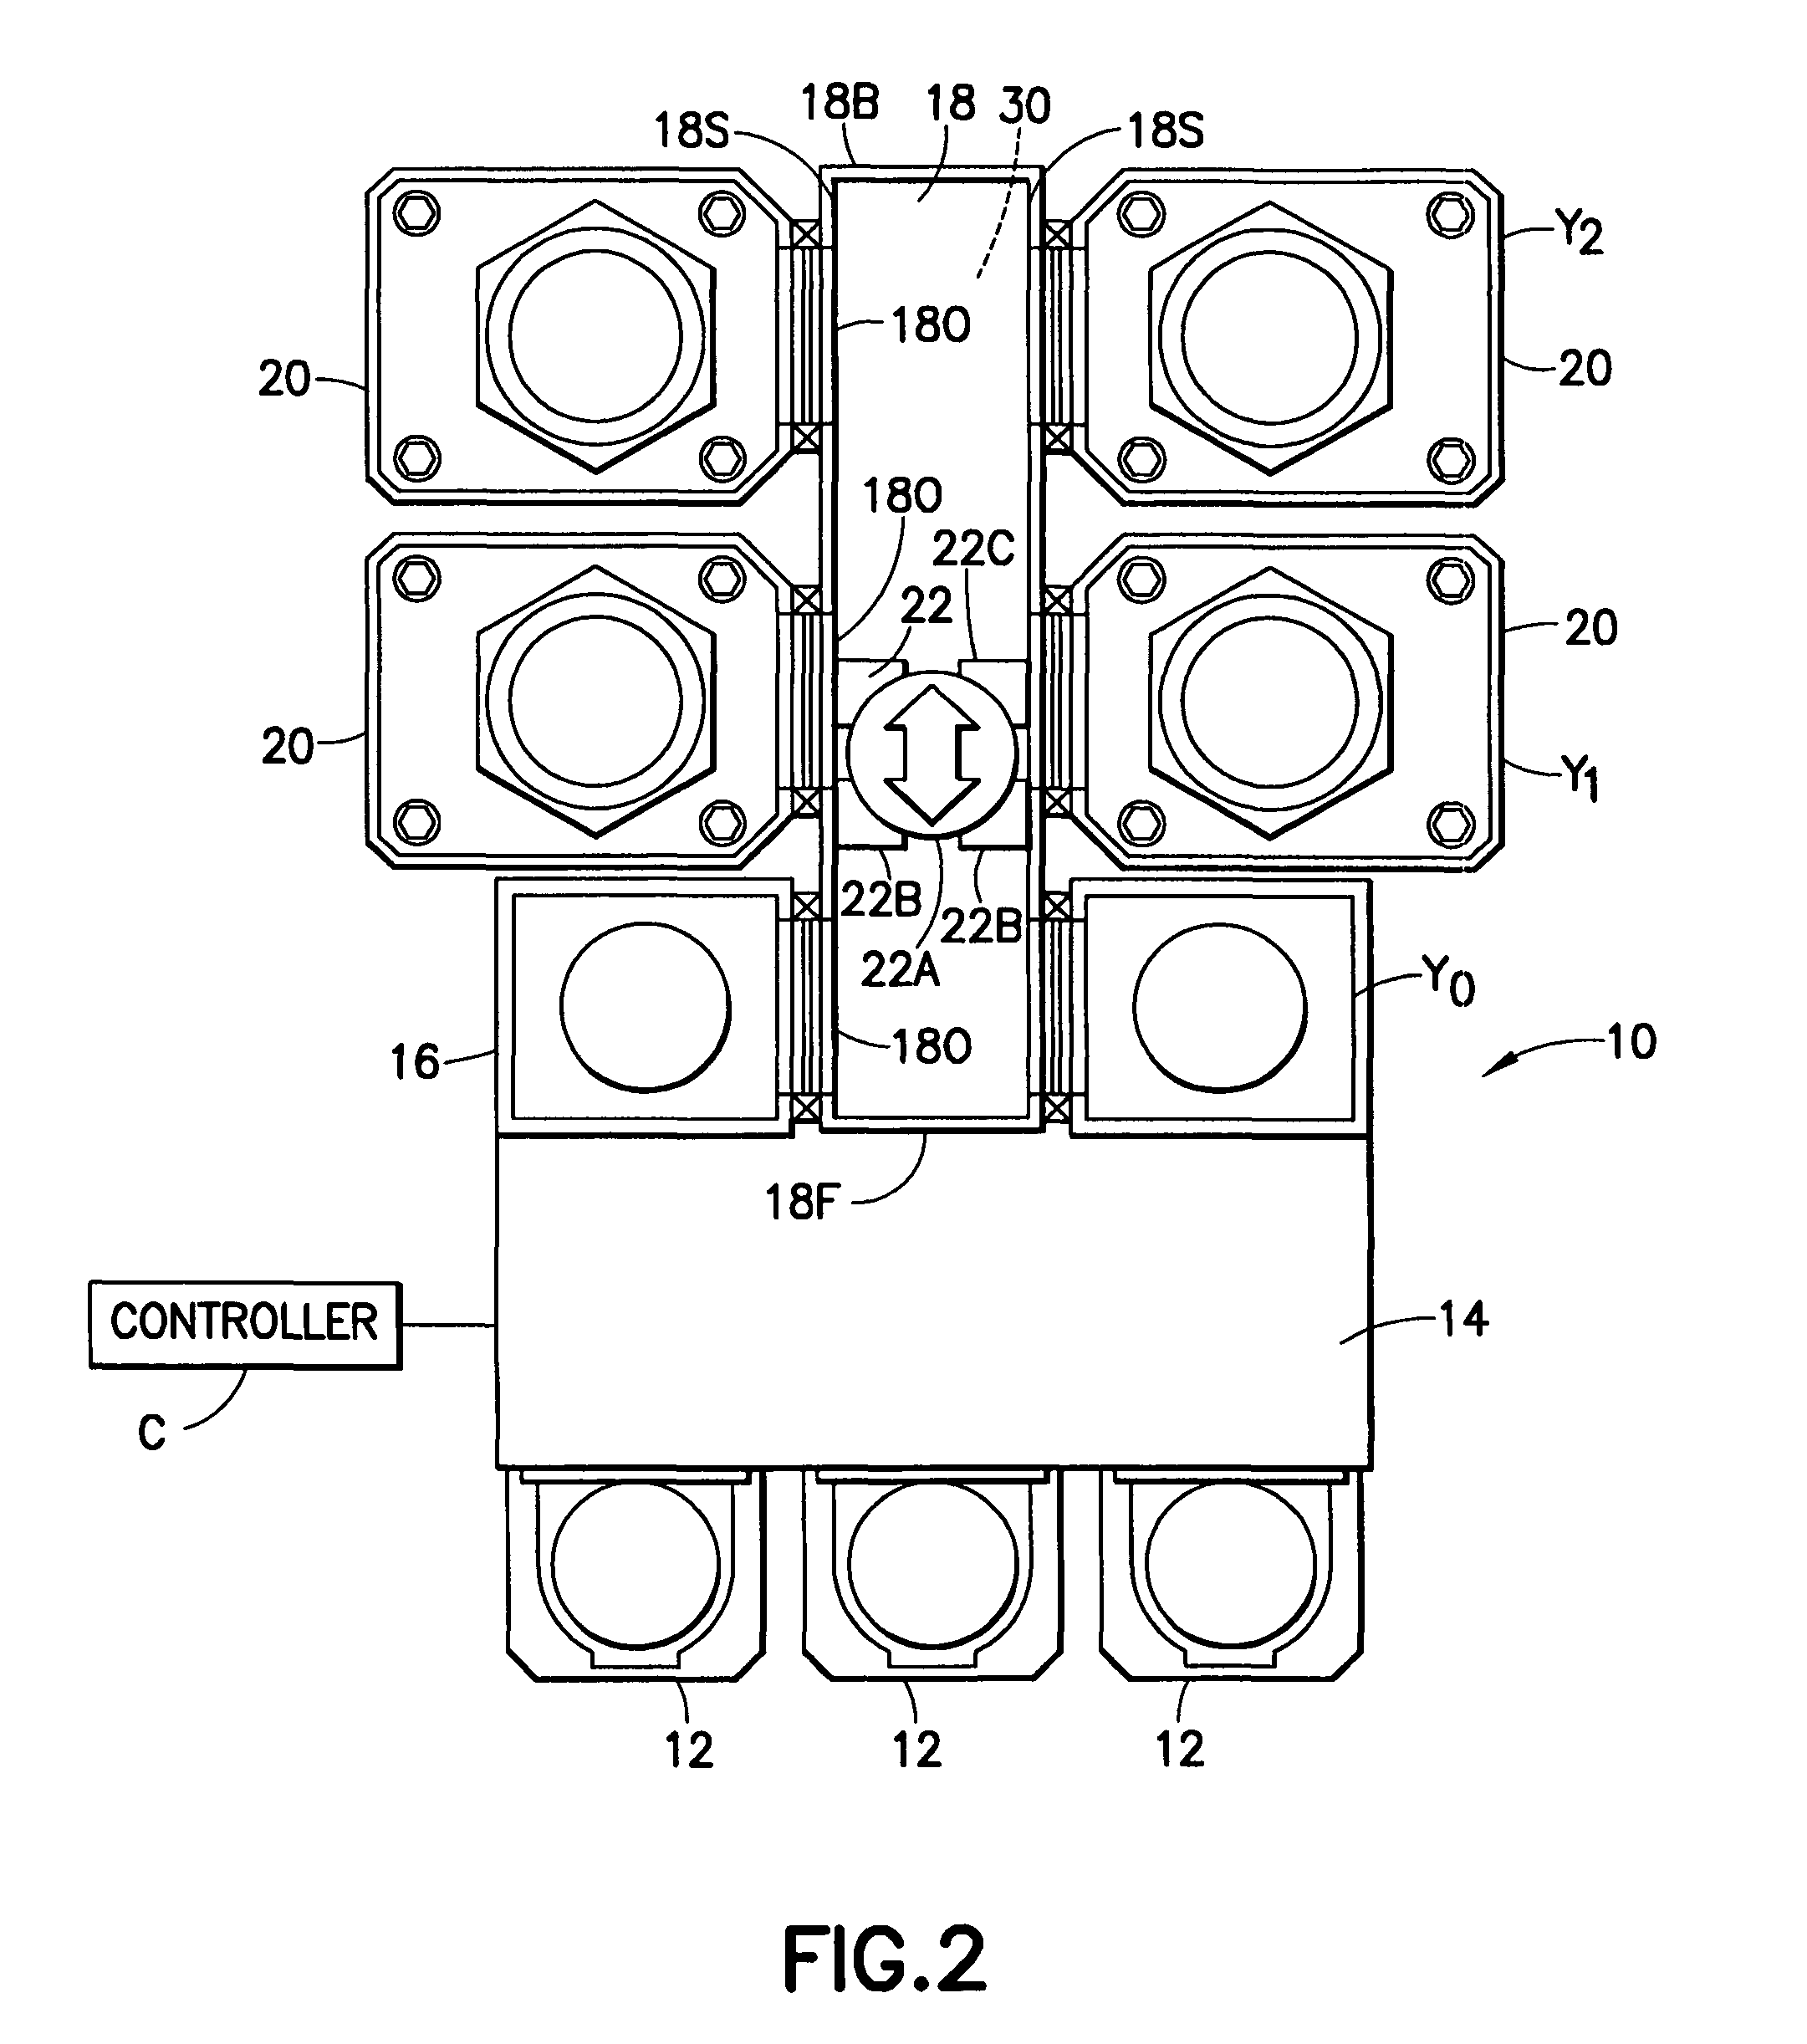 Linear substrate transport apparatus